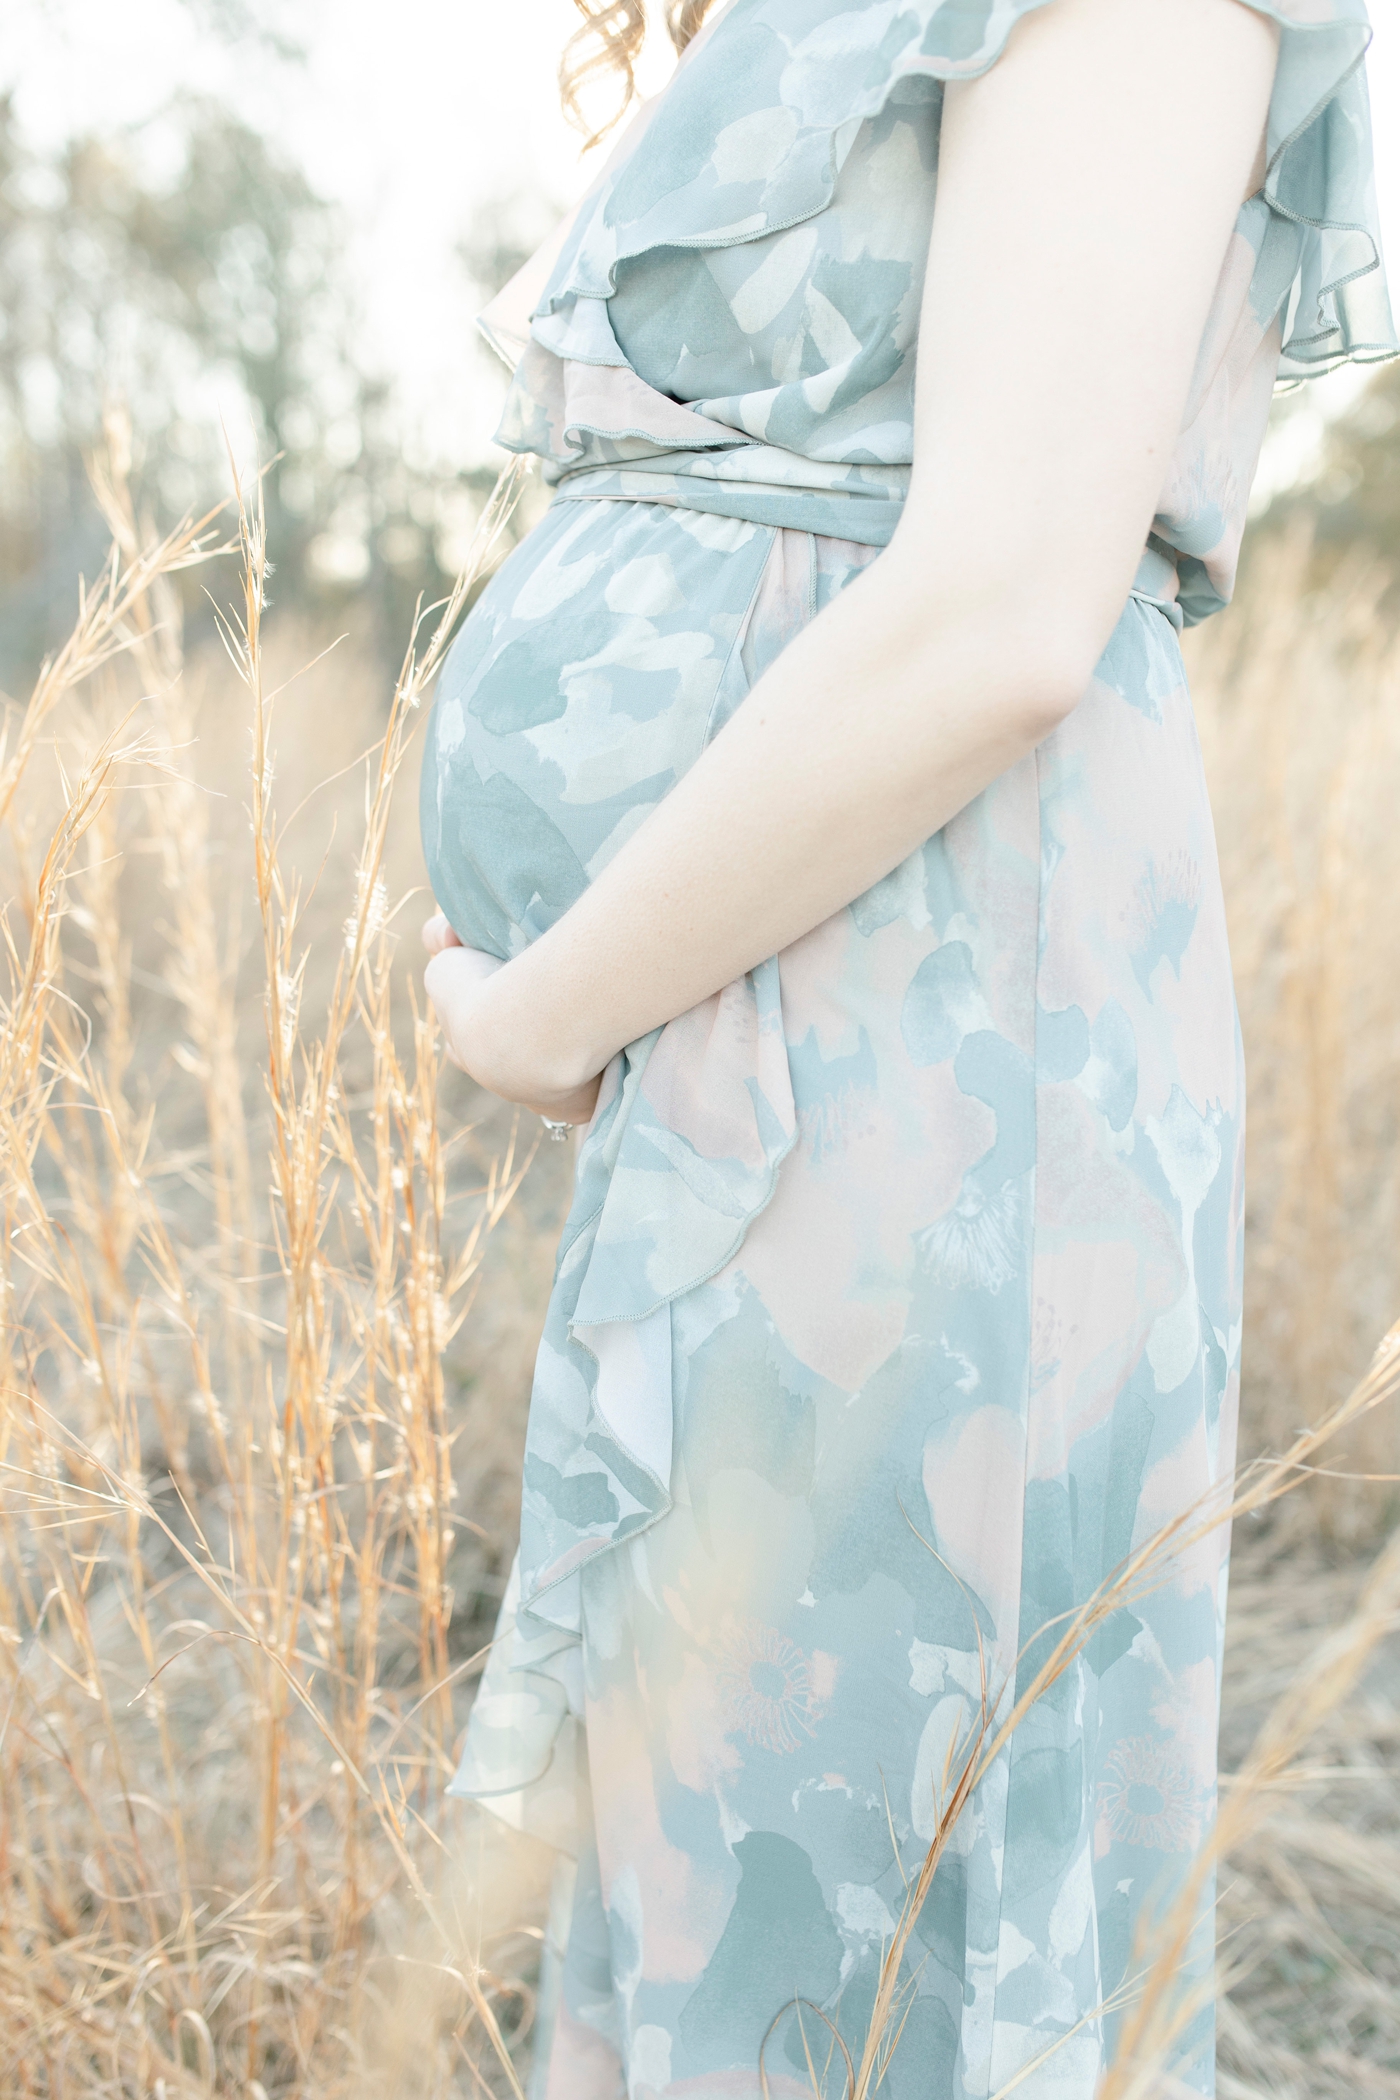 Mom holding her pregnant belly. Photo by Little Sunshine Photography.